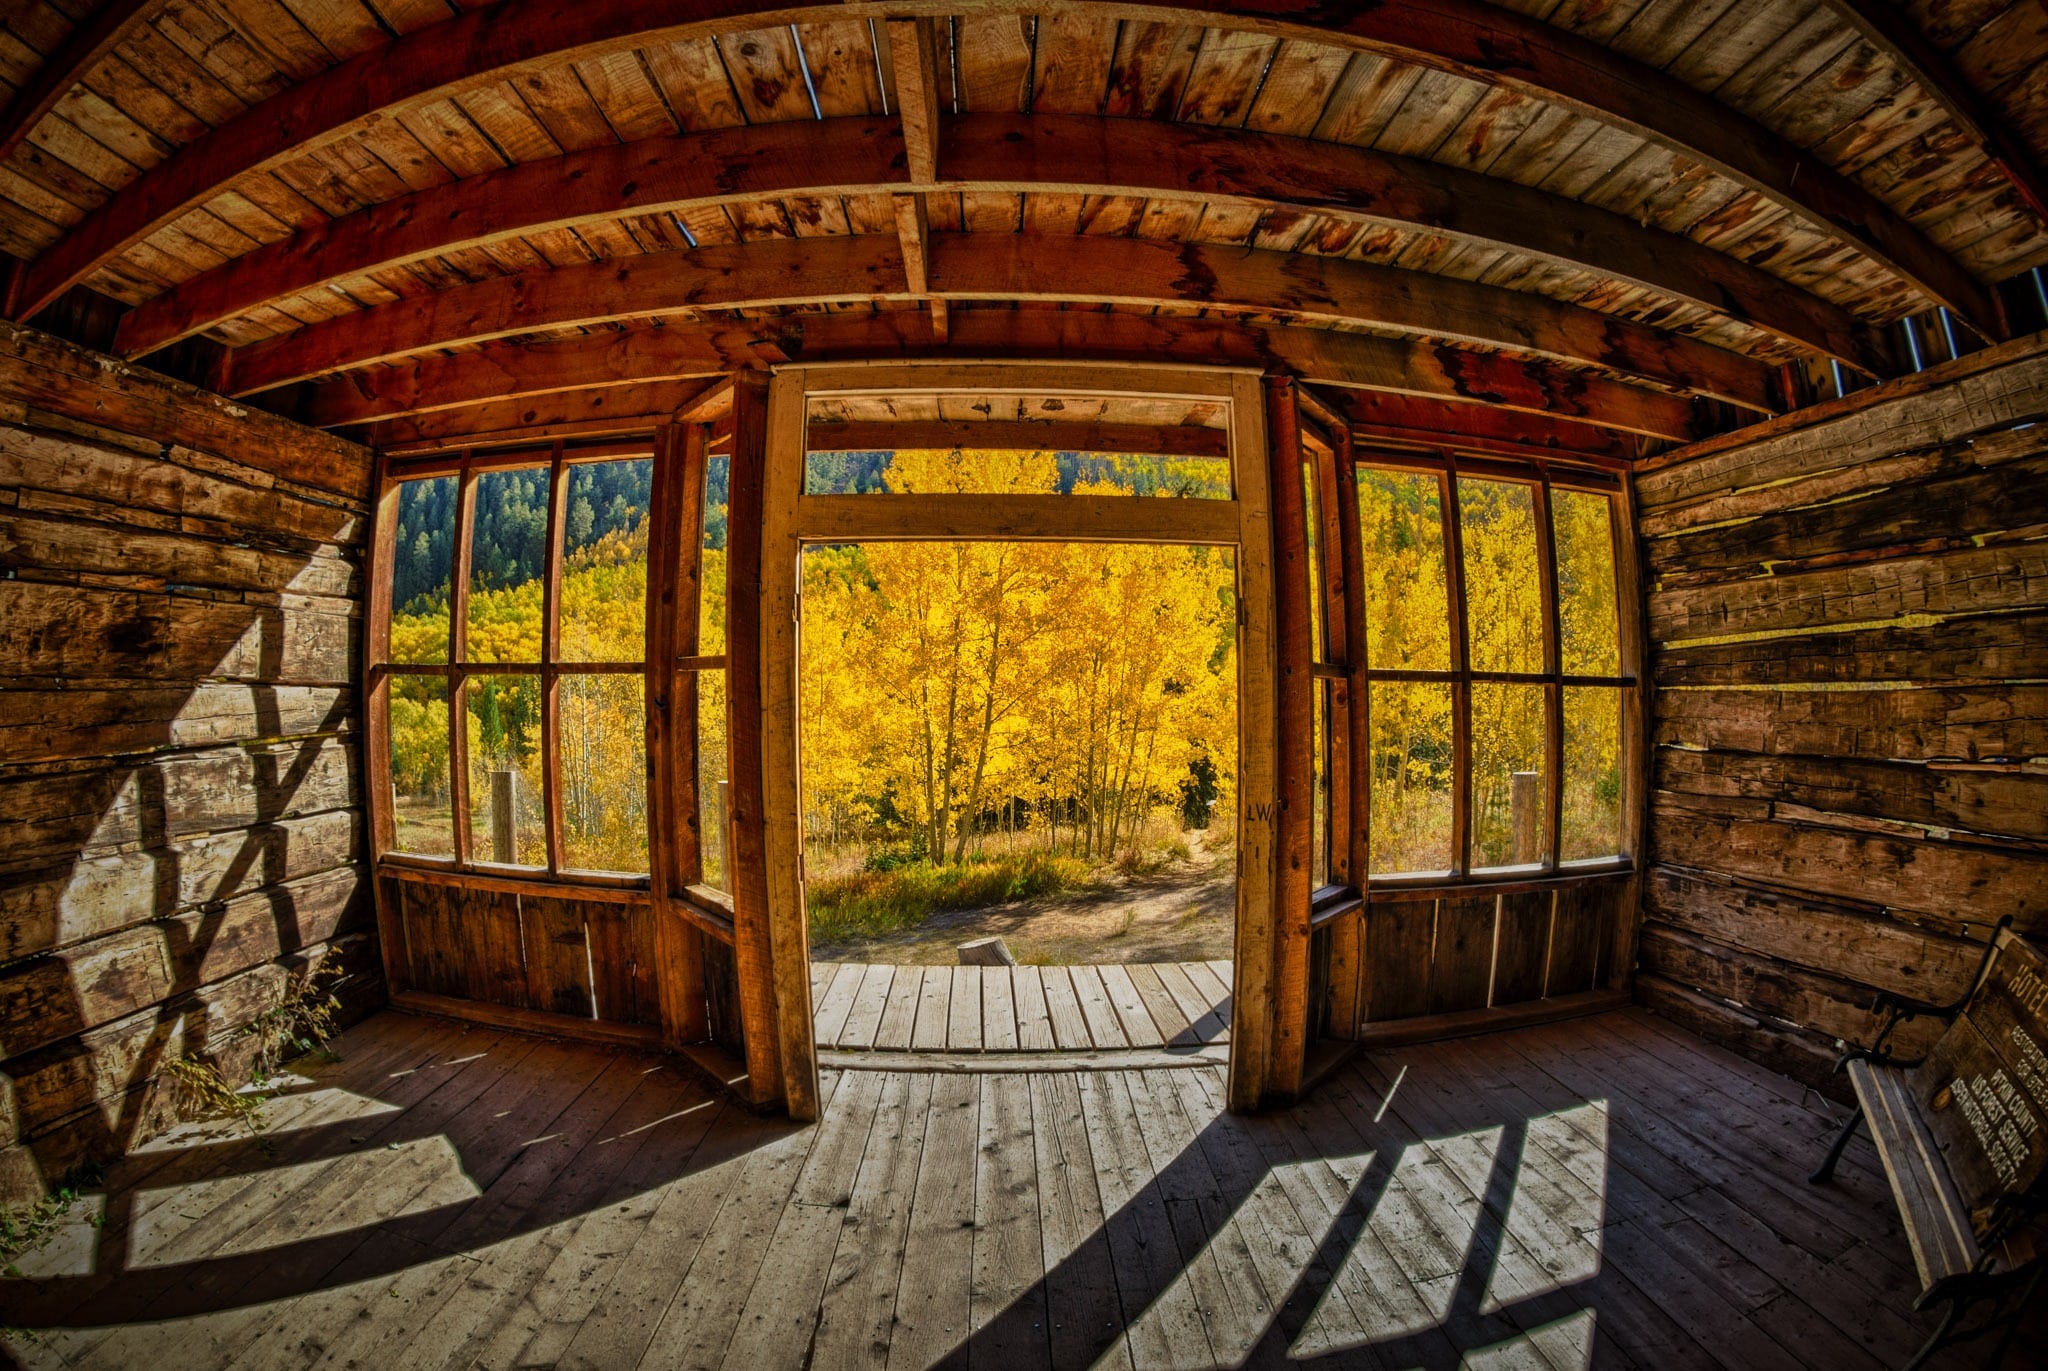 A view looking out from the "lobby" of the hotel in the ghost town of Ashcroft, Colorado.